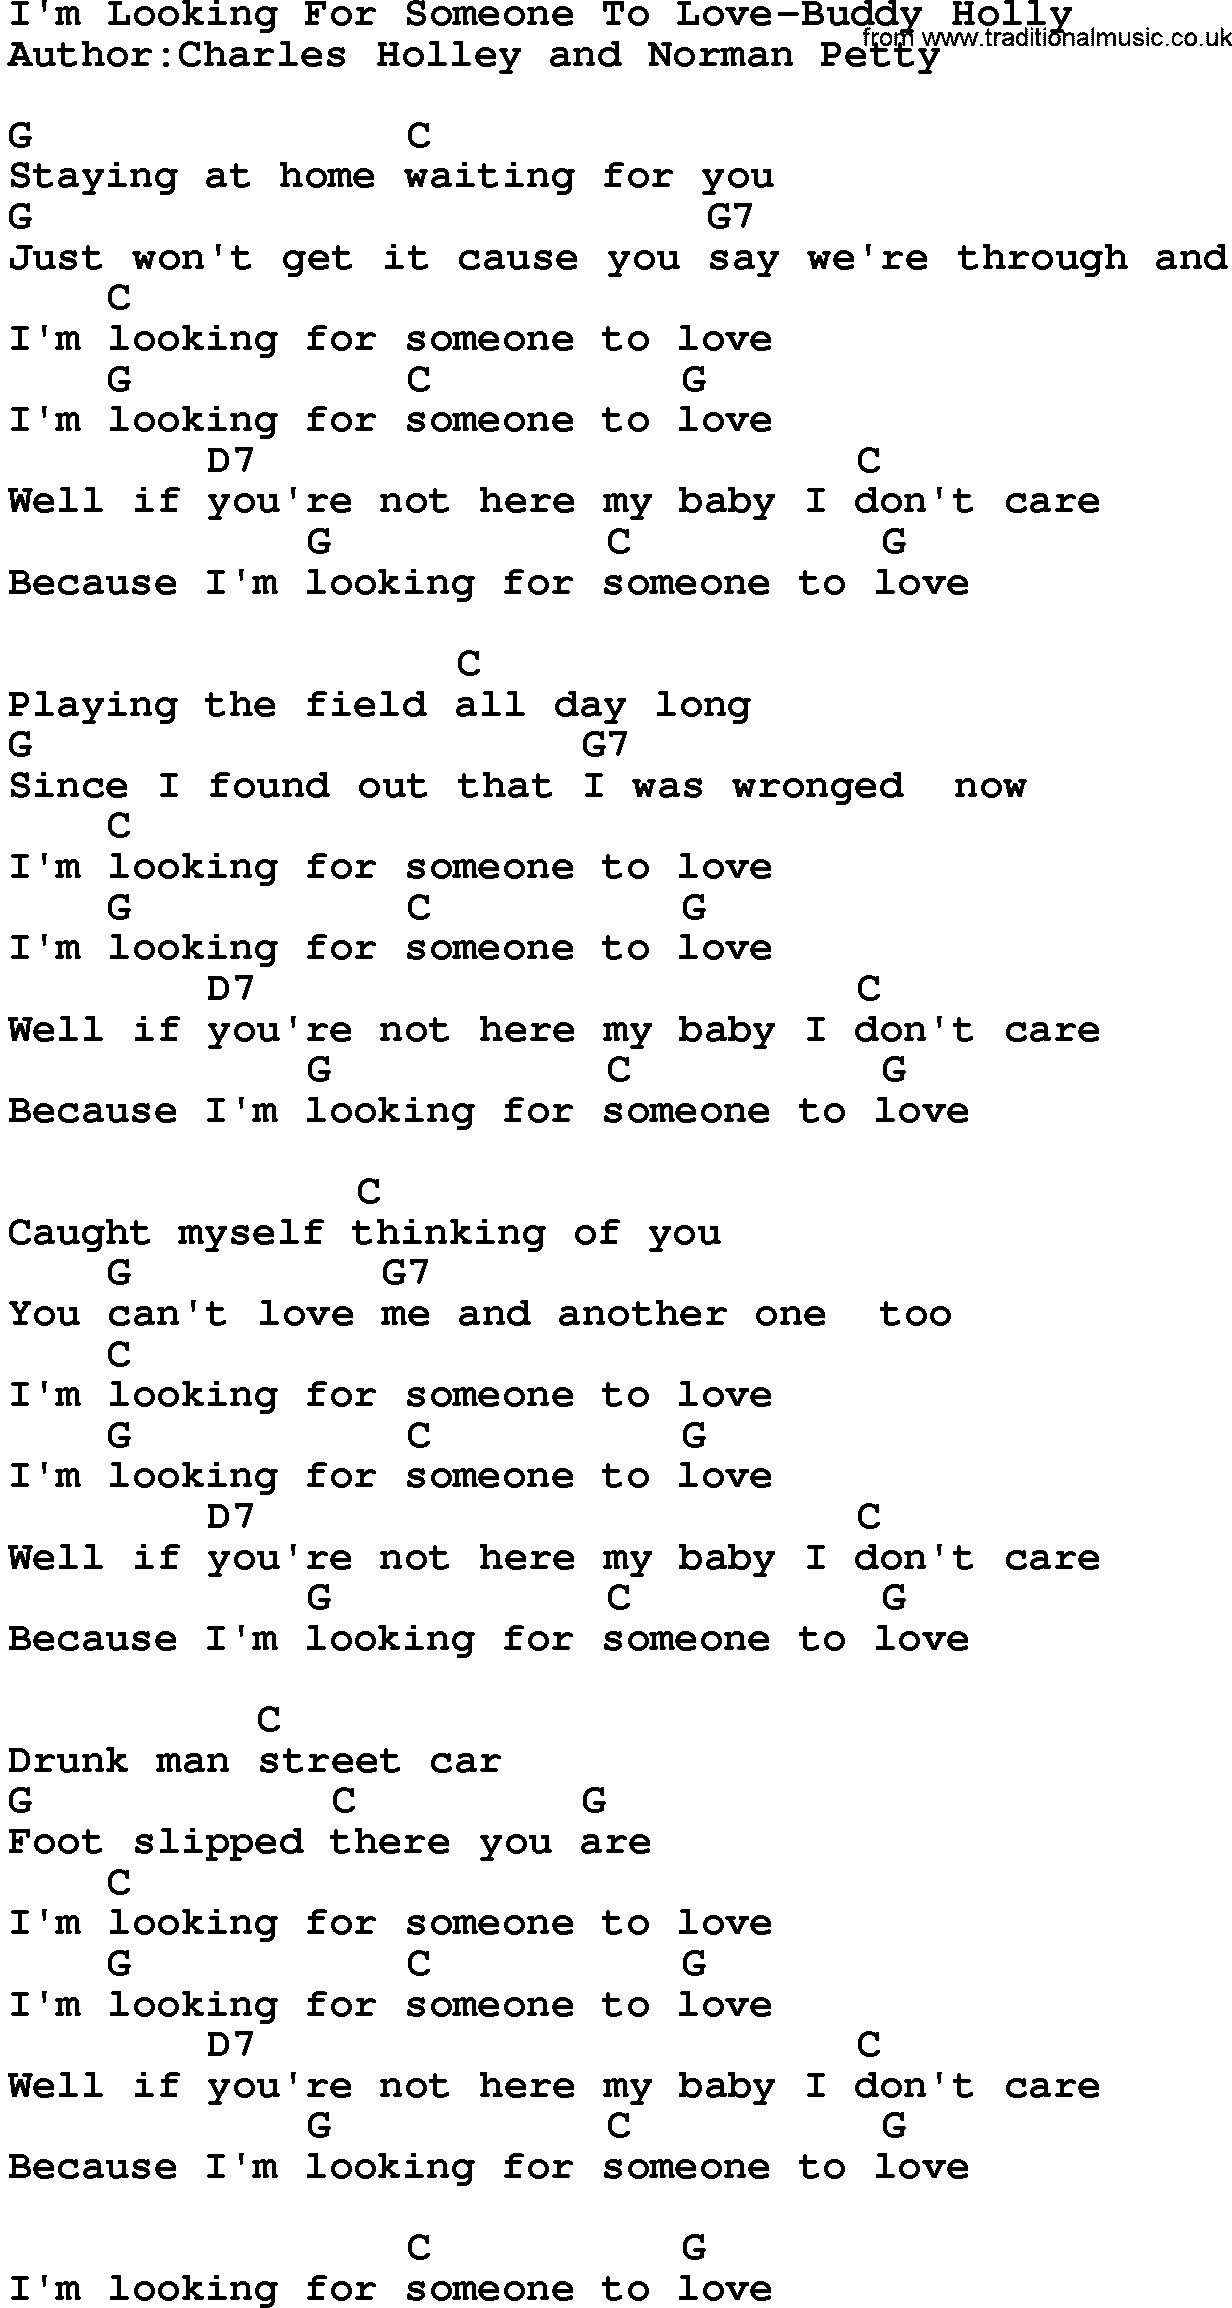 Country music song: I'm Looking For Someone To Love-Buddy Holly lyrics and chords